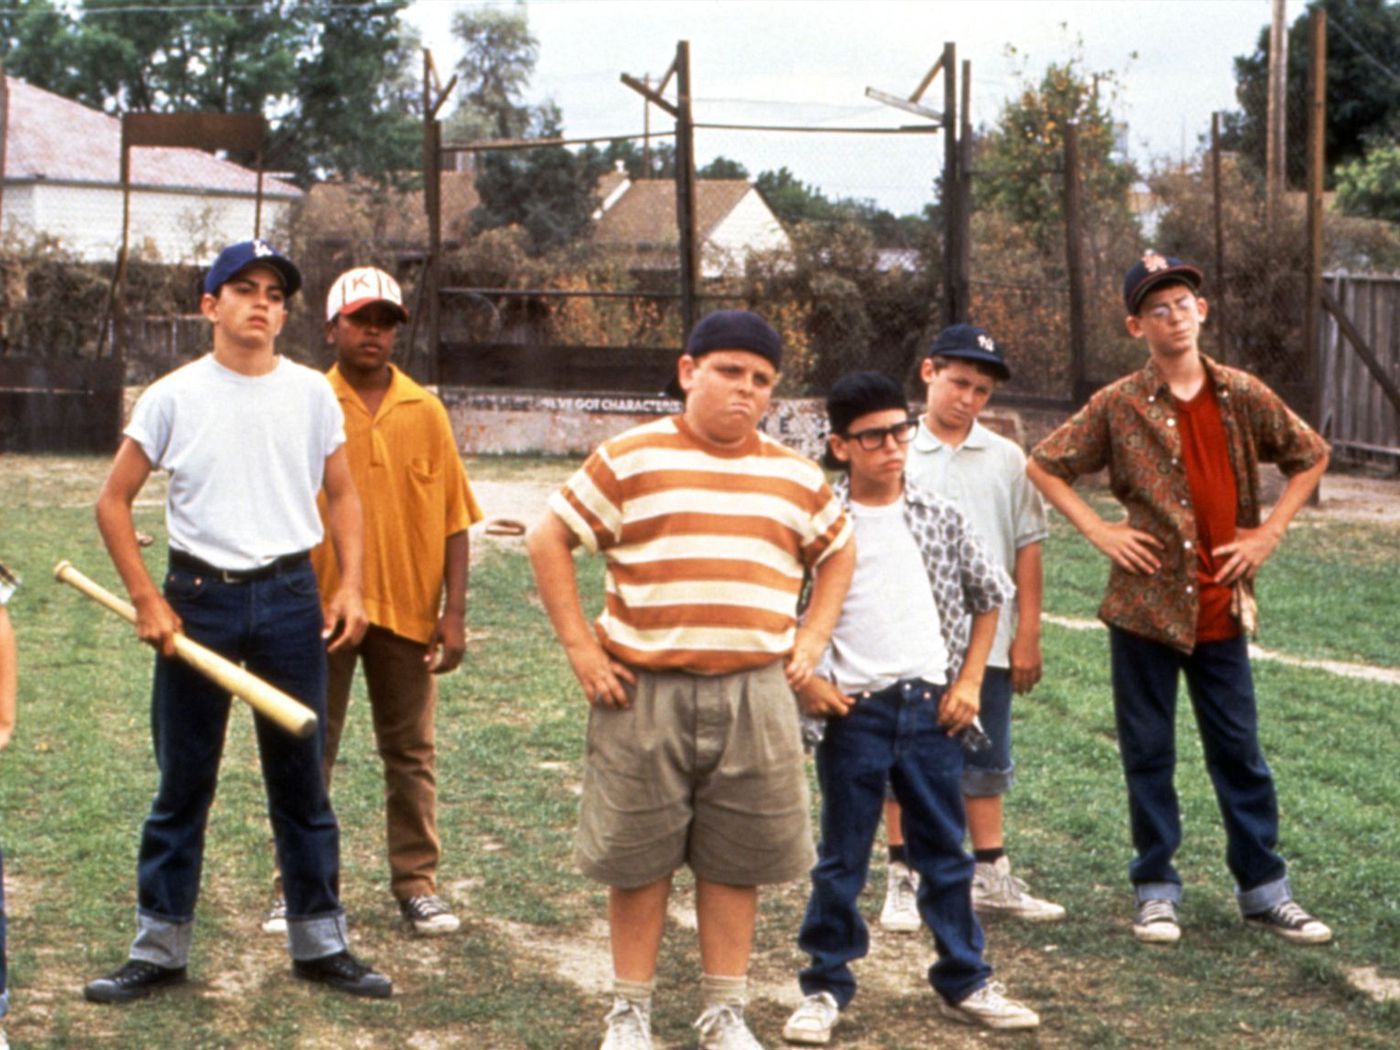 The Sandlot' scouting report